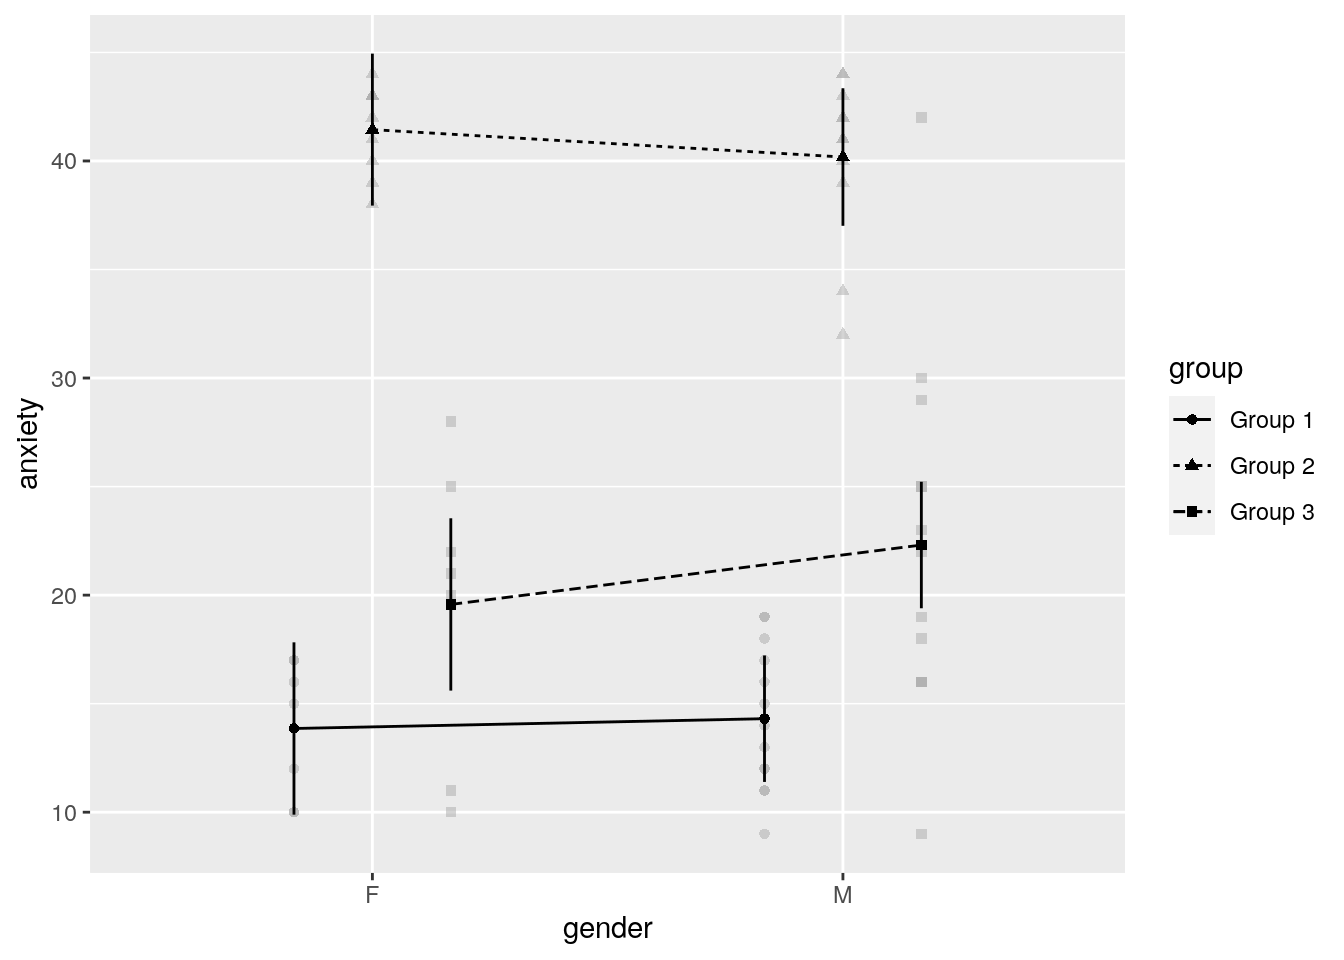 An example plot with afex_plot()